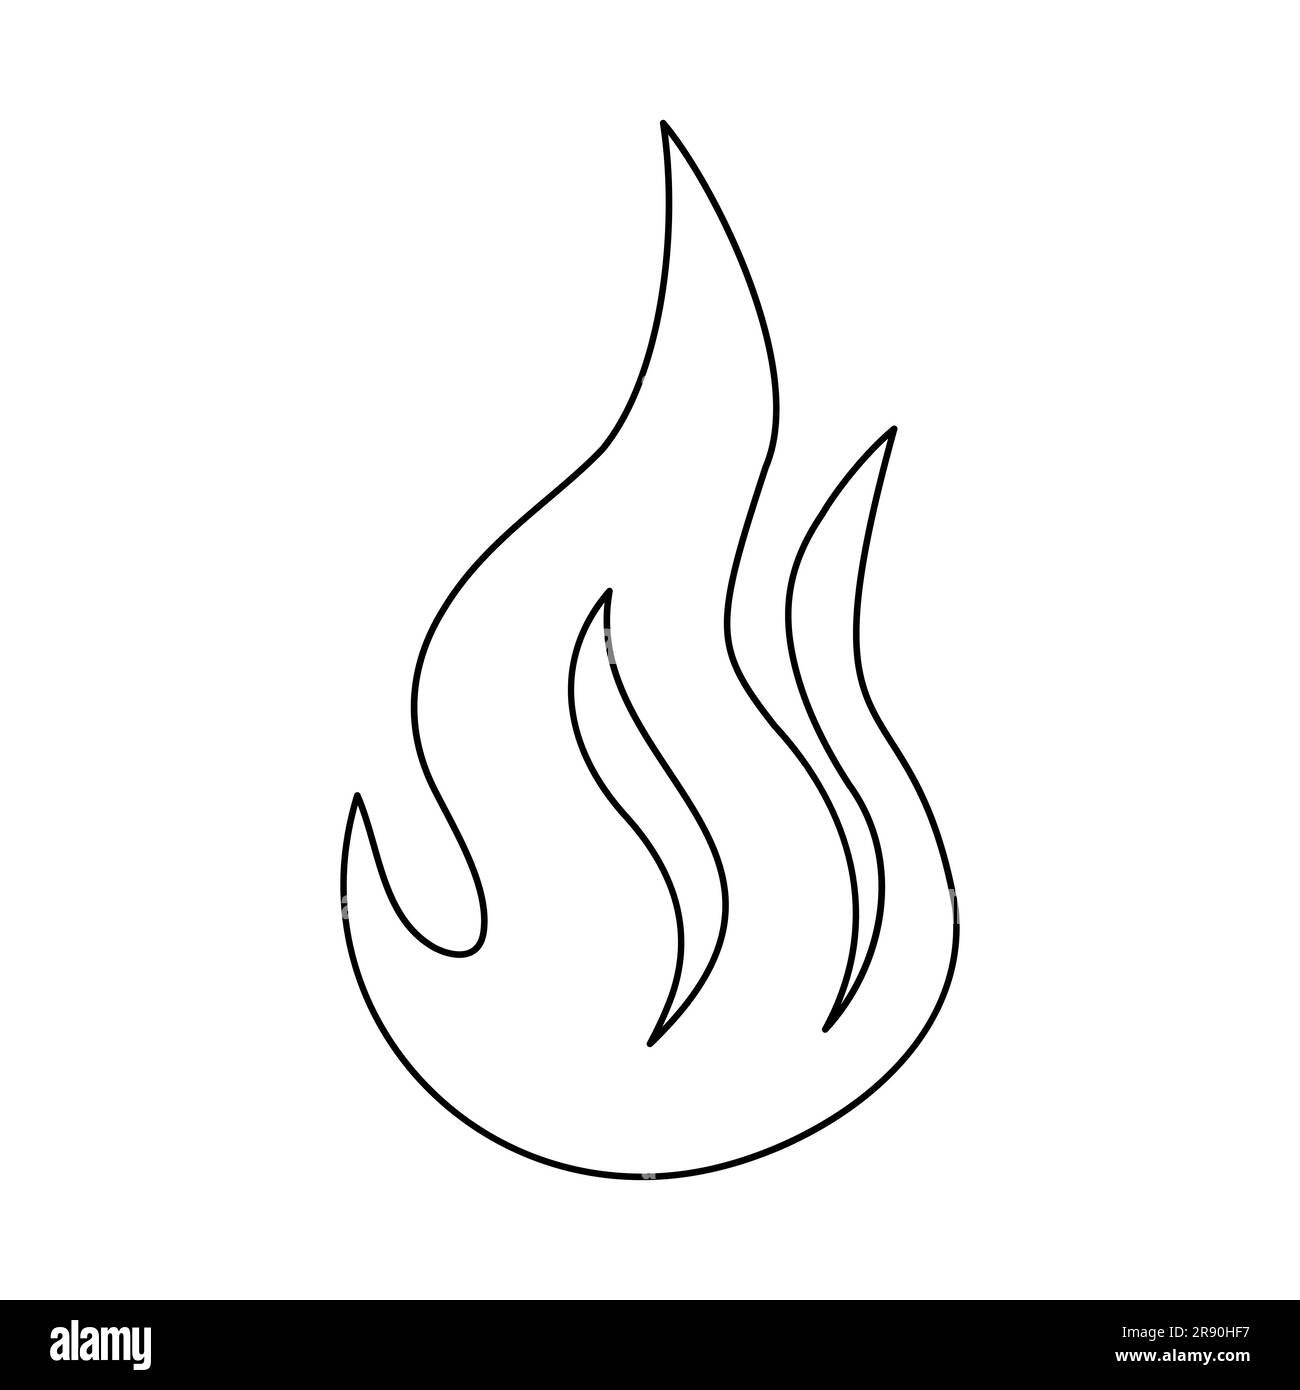 Black fire outline icon. Vector illustration isolated on white background Stock Vector